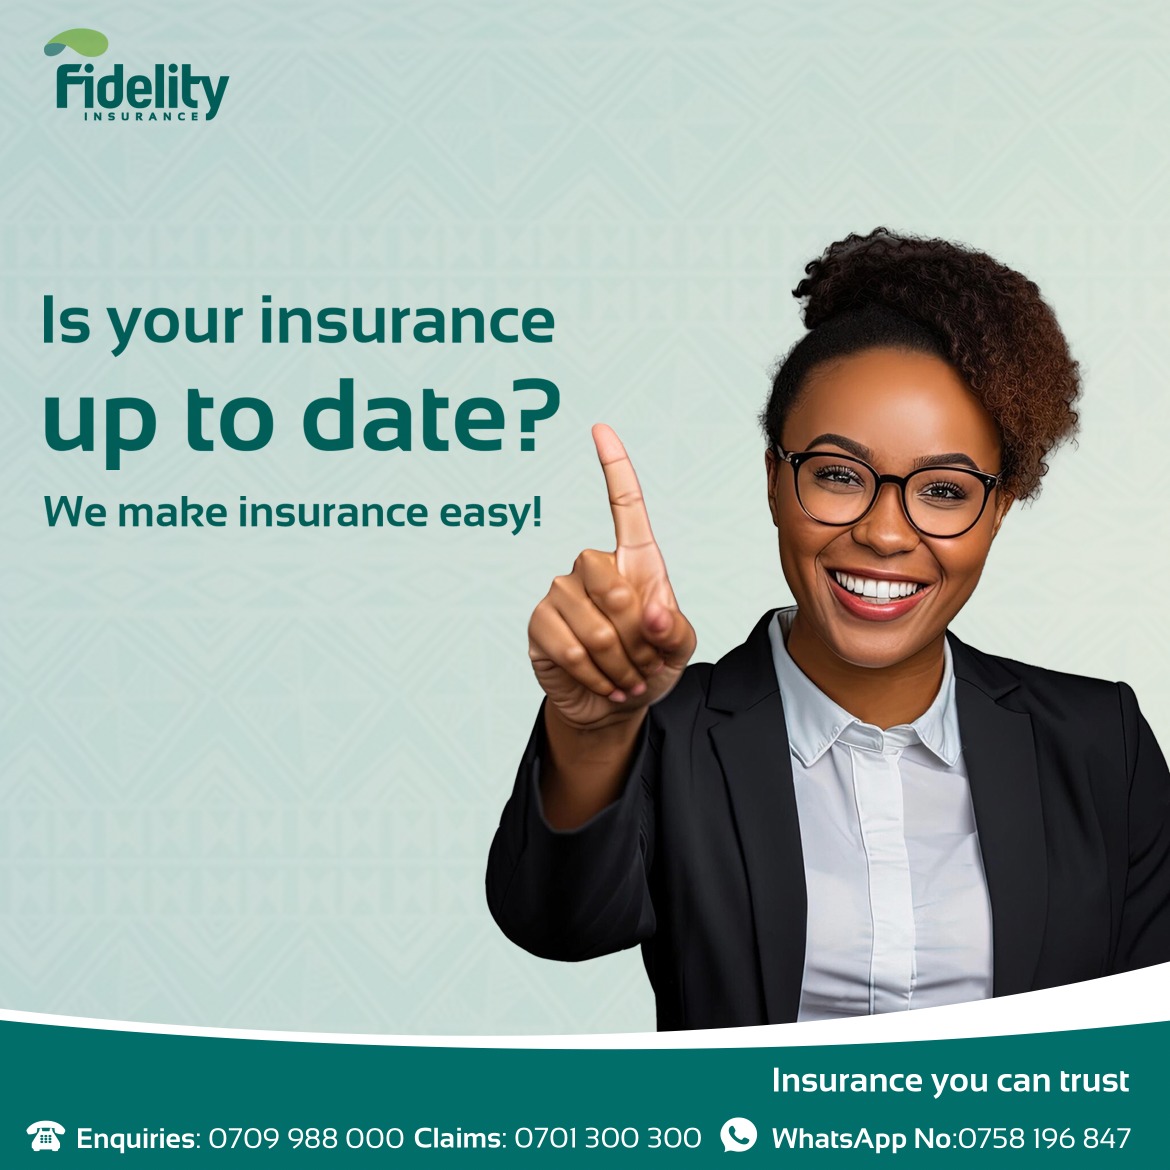 Protect your business with our tailored insurance plans.Get a quick quote by calling 0709988000 now and stay covered.
#fidelityshield #insuranceyoucantrust #insurance #businessinsurance #business